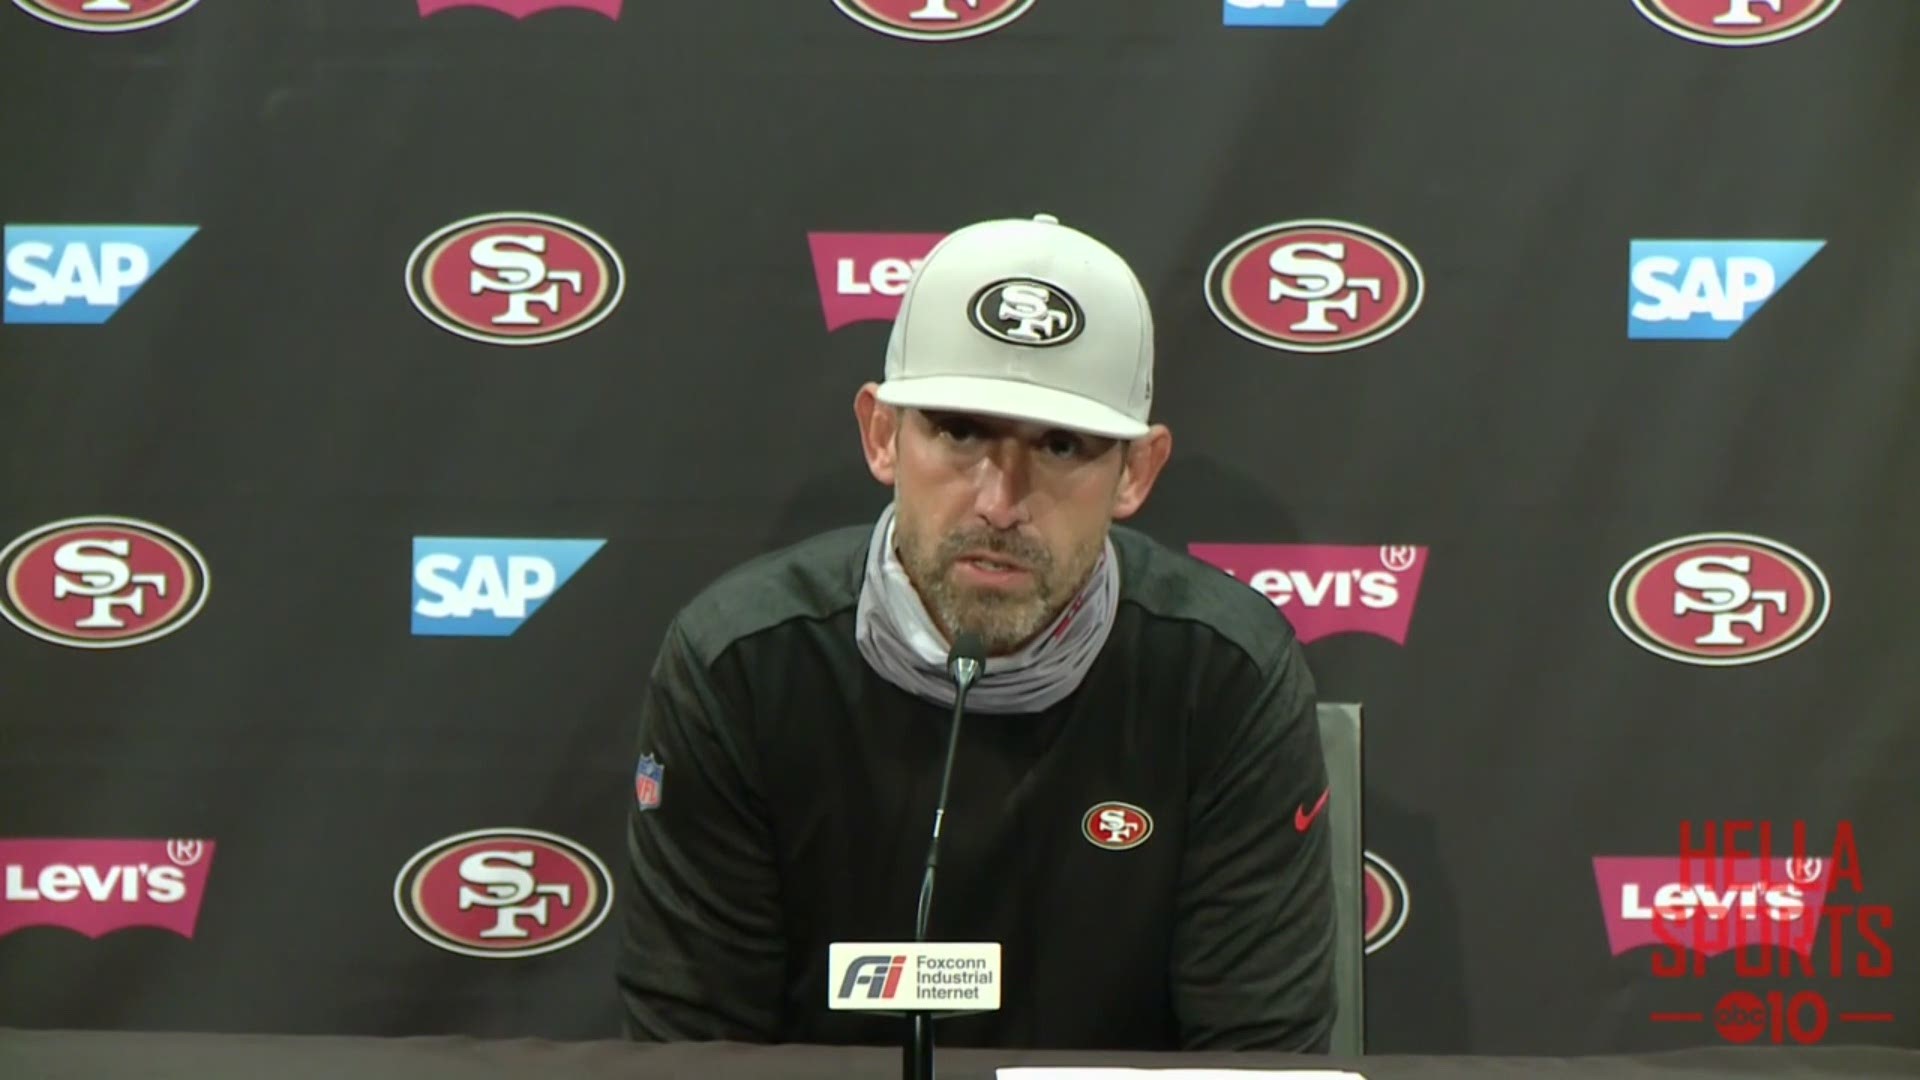 Kyle Shanahan talks about his 49ers team heading into week two with the Jets and updates injuries to Richard Sherman and George Kittle.